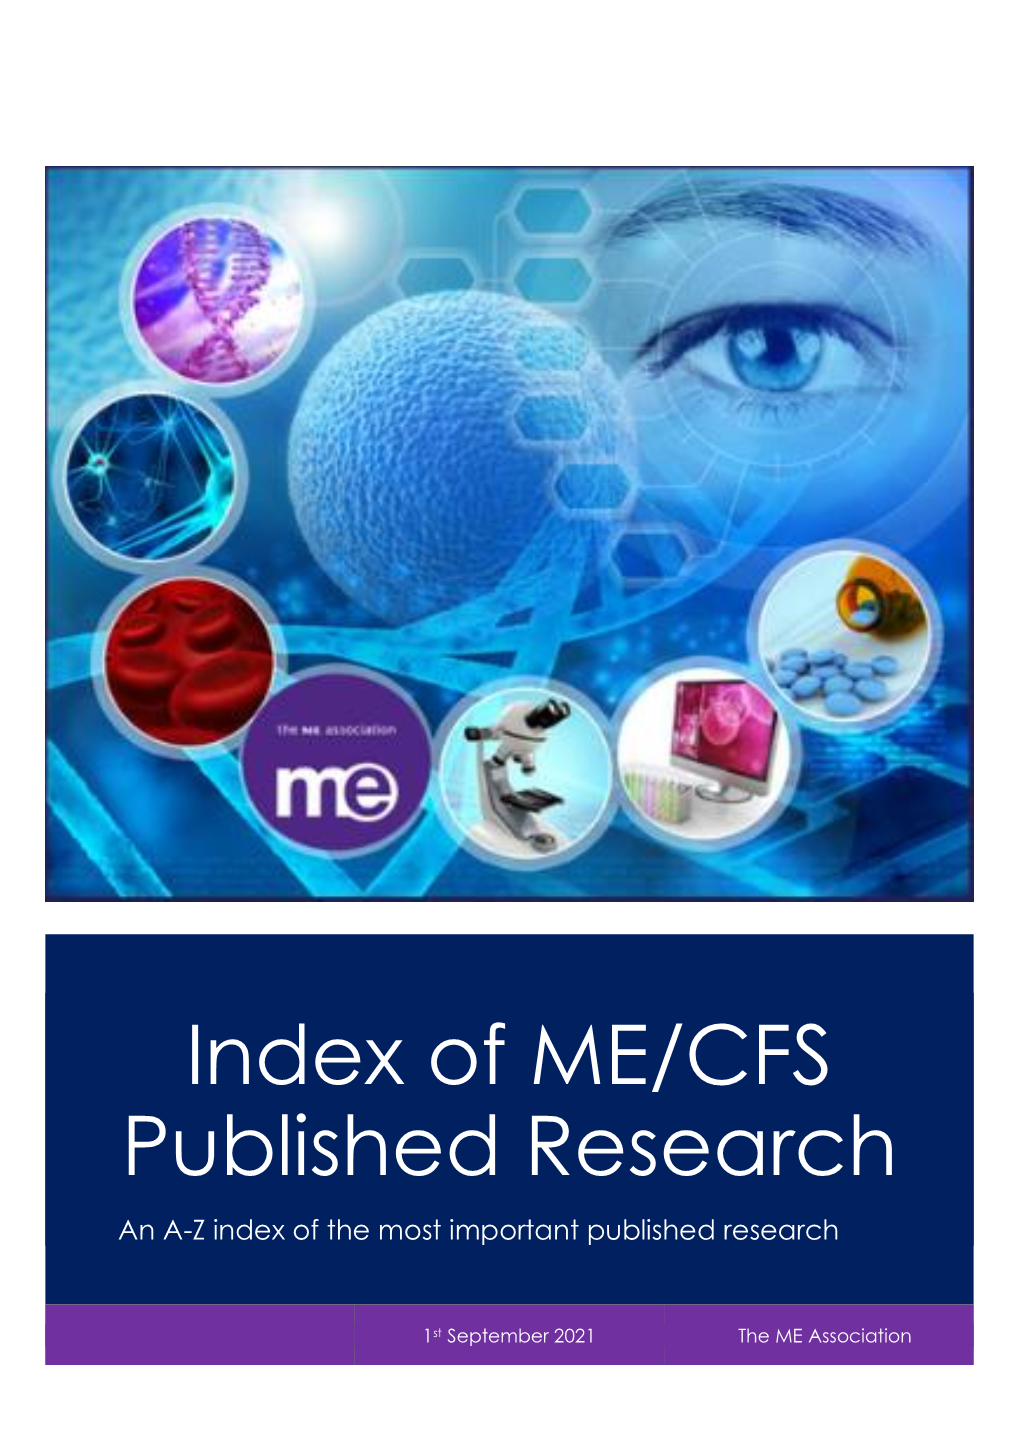 Index of ME/CFS Published Research an A-Z Index of the Most Important Published Research